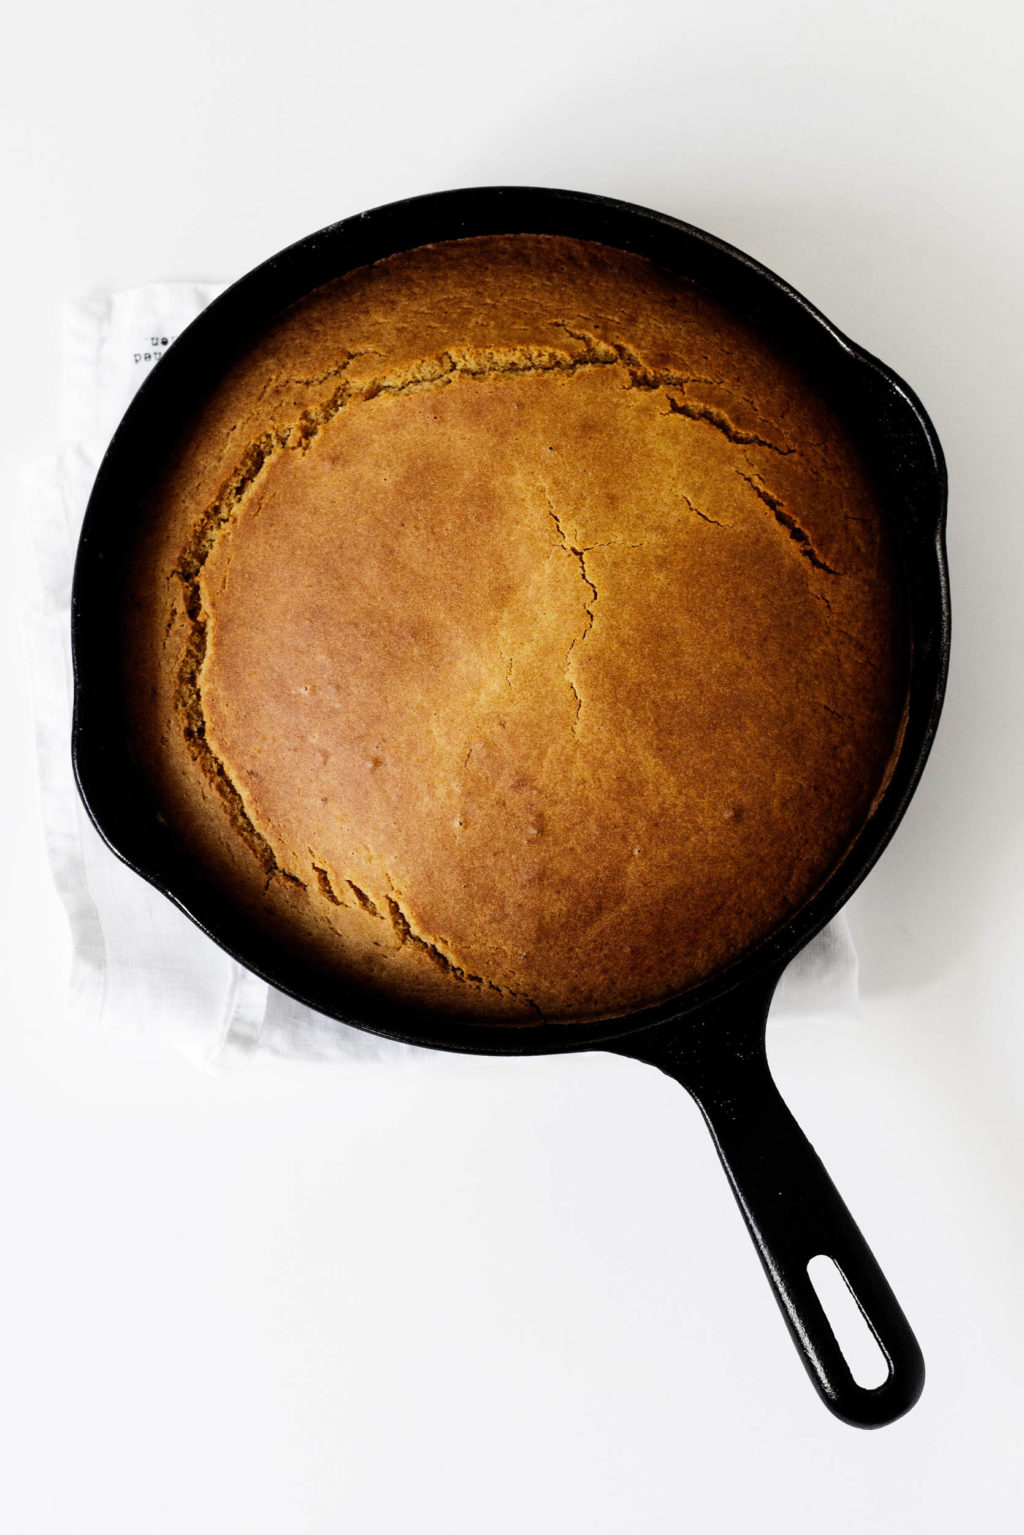 Pumpkin Cornbread Made in Cast Iron Skillet - Tender, Delicious Fall Fave!